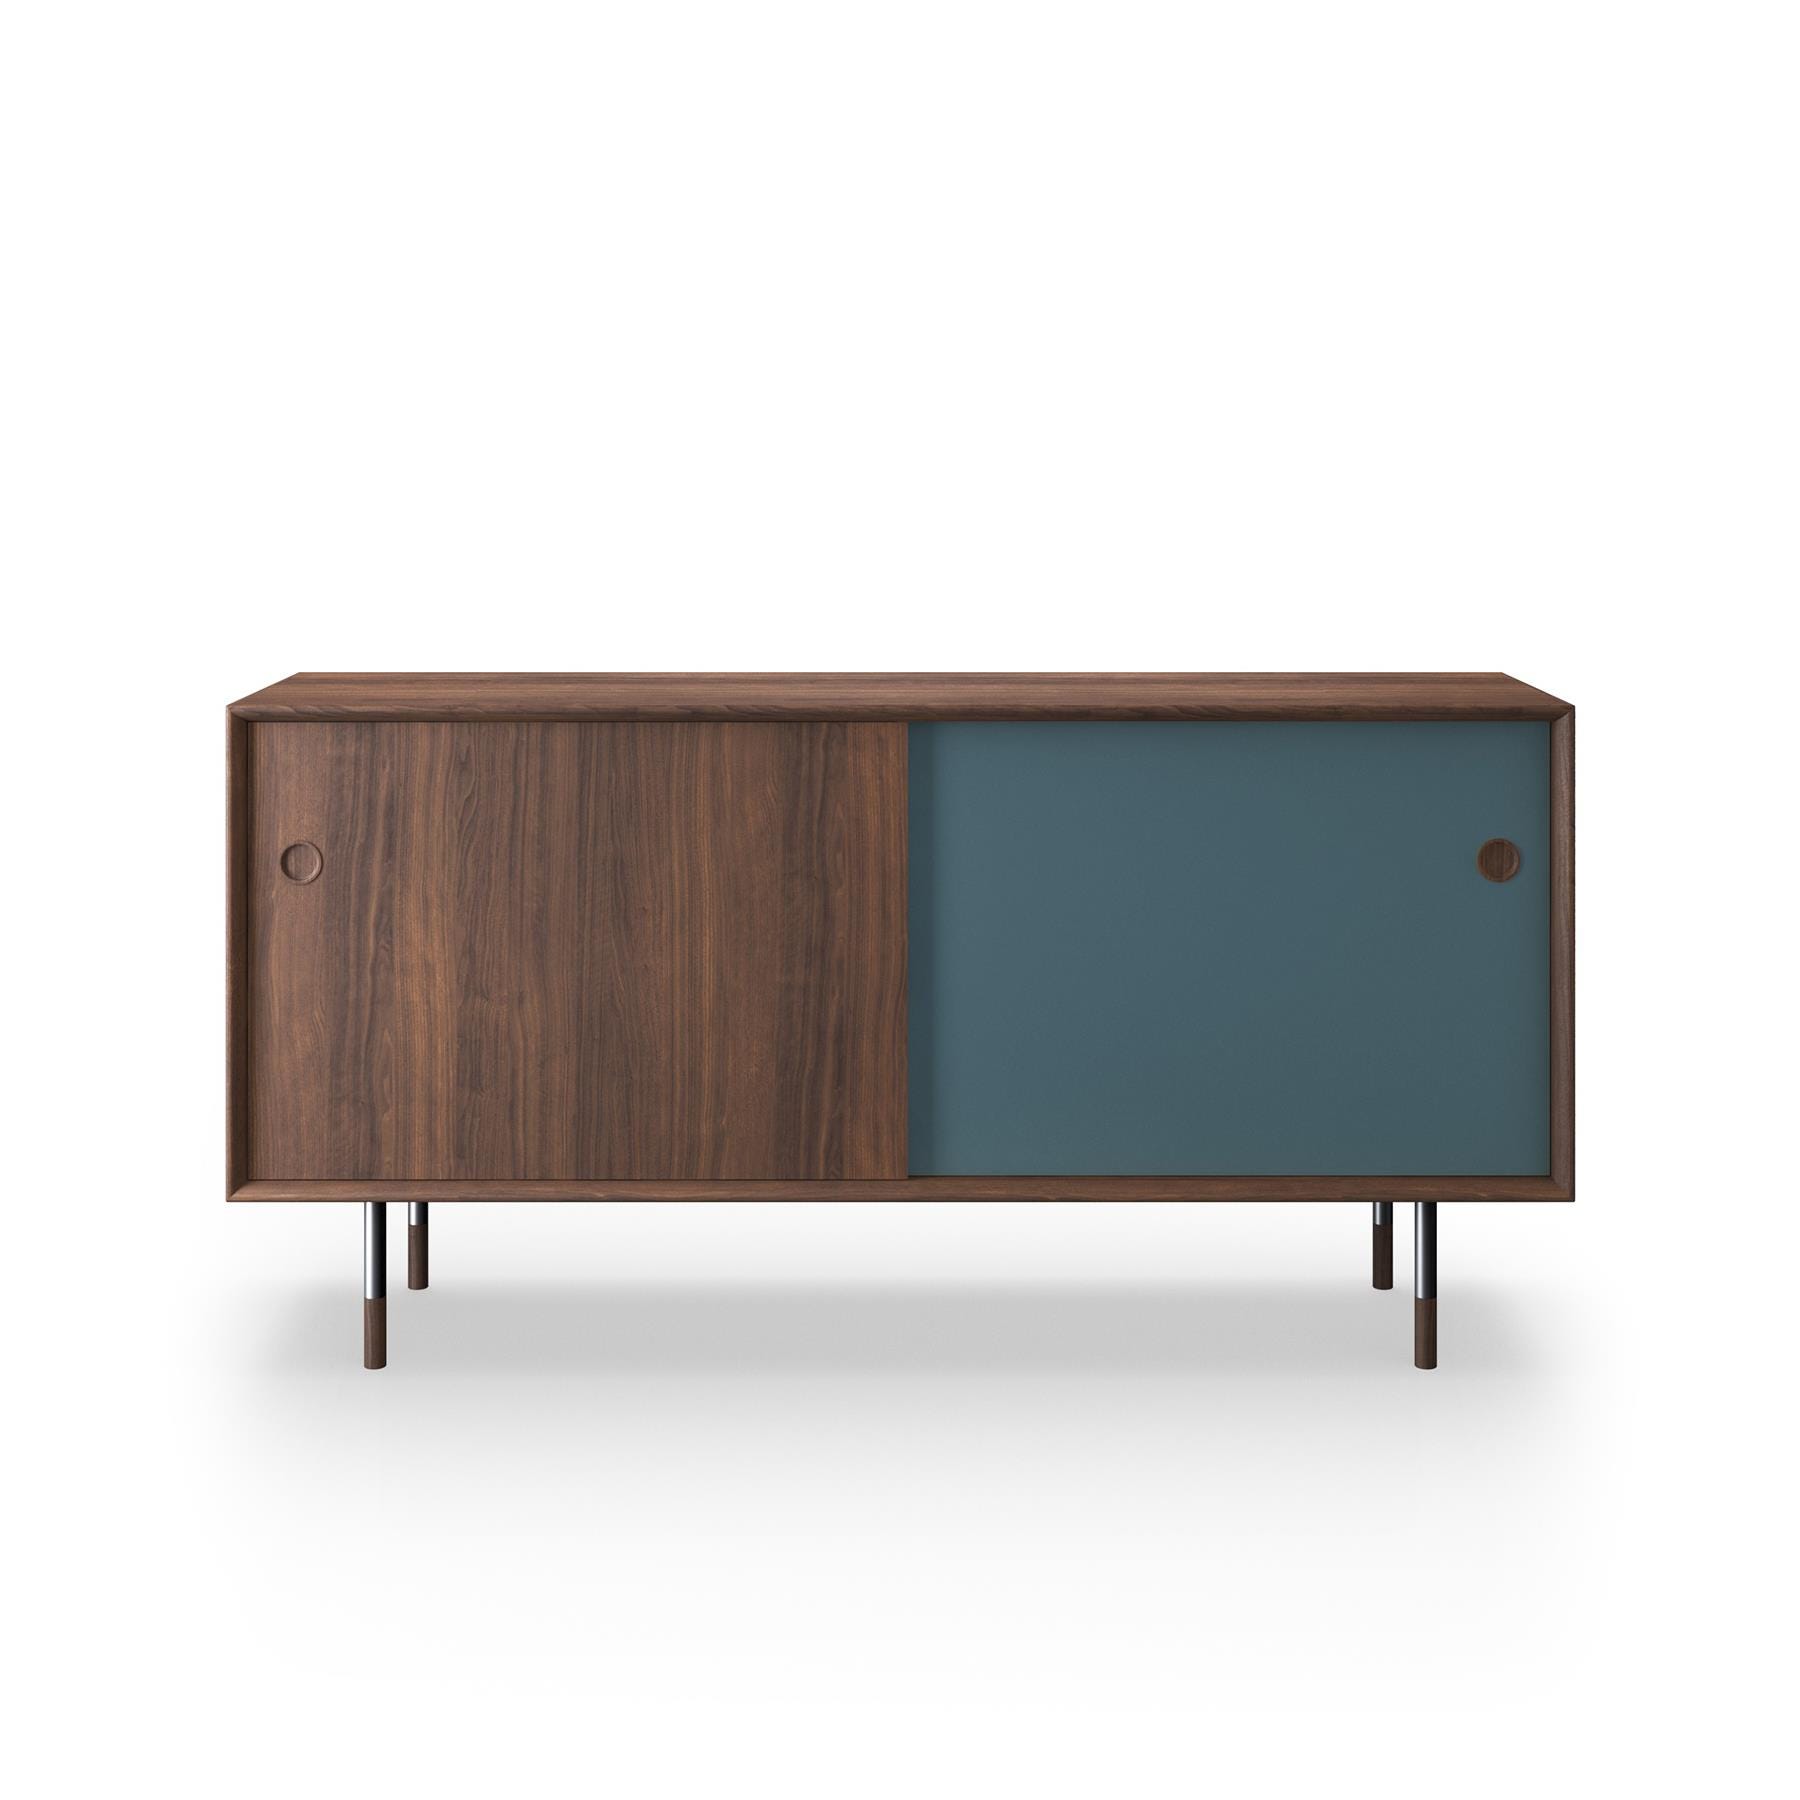 Sibast No 11 Sideboard Walnut Blue And Natural Front Metal Legs Dark Wood Designer Furniture From Holloways Of Ludlow